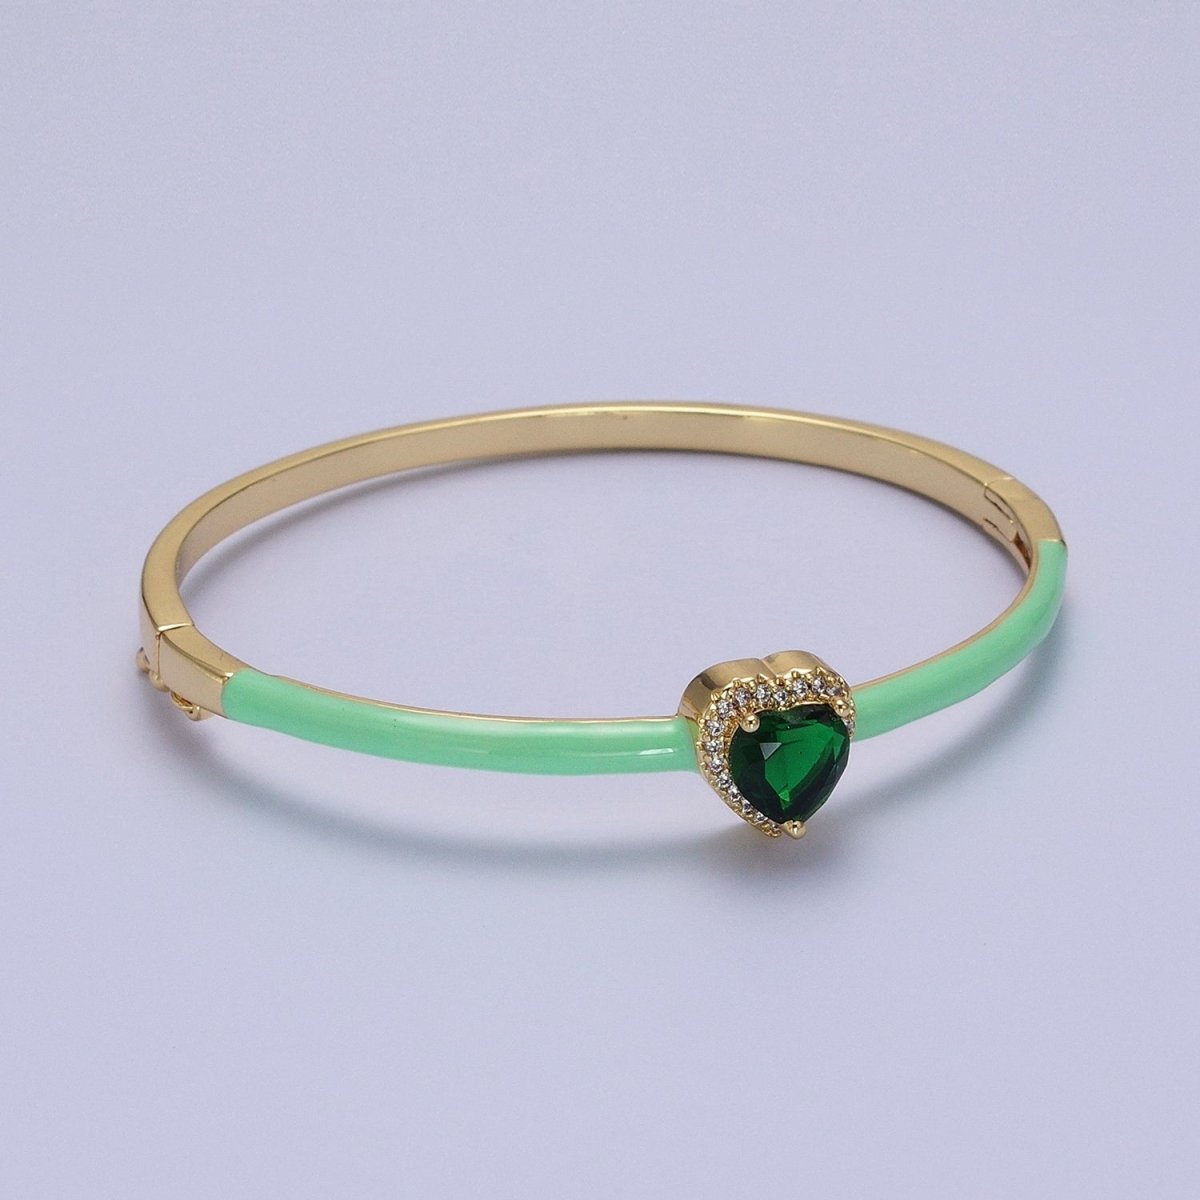 Barbie core Gold Filled Heart White, Green, Pink Micro Paved Enamel Gold Bangle Bracelet | WA-1351 - WA-1353 Clearance Pricing - DLUXCA